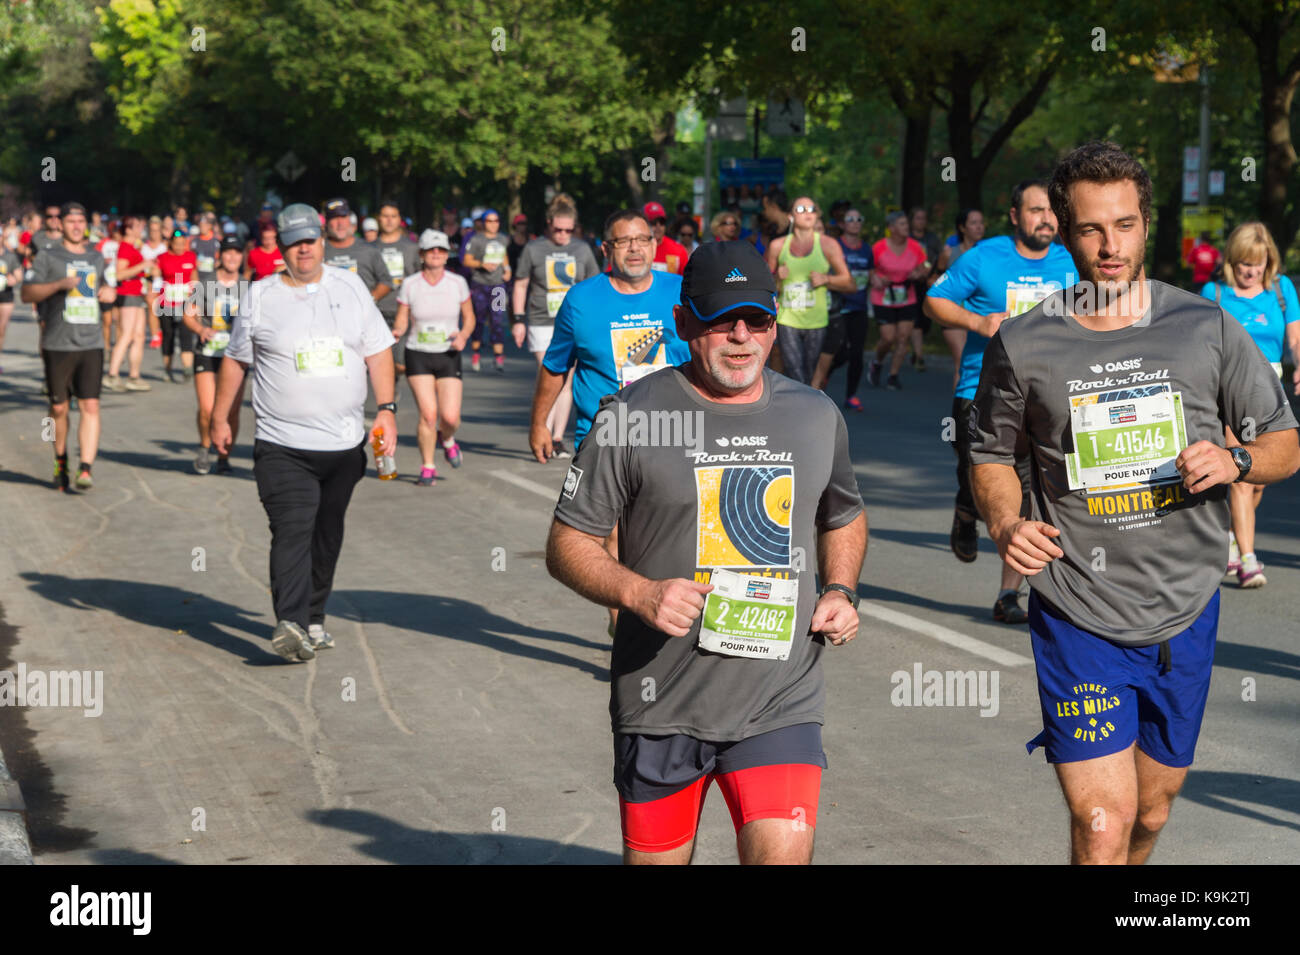 Montreal, Canada. 23rd Sep, 2017. 5km runners during Montreal Oasis Rock 'n' Roll 5km race Credit: Marc Bruxelle/Alamy Live News Stock Photo